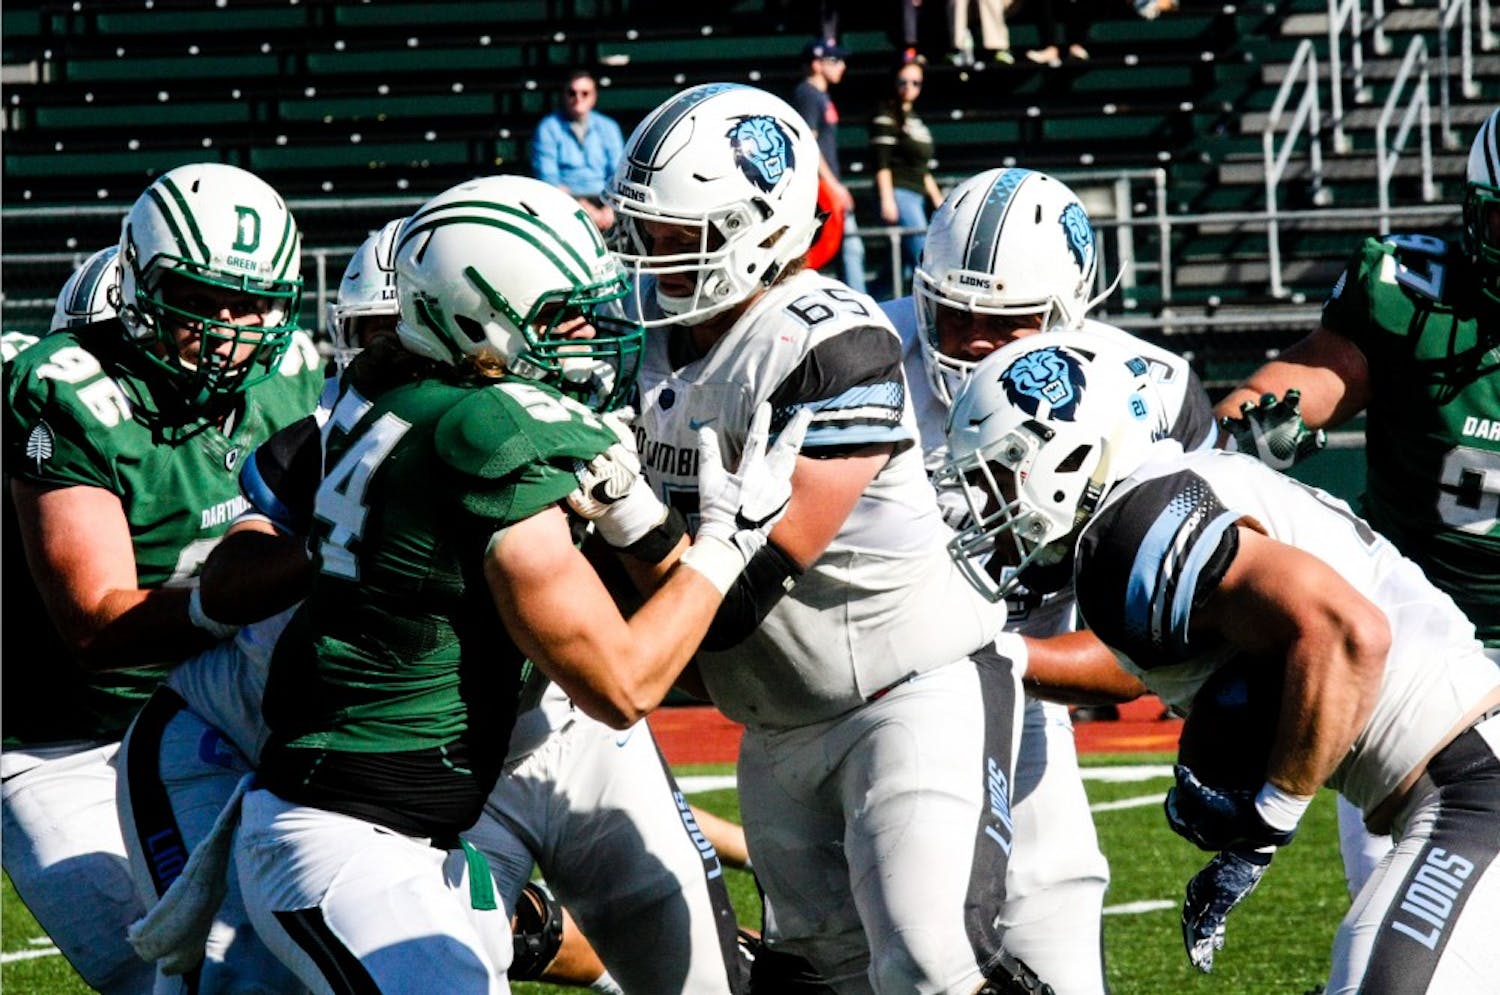 Dartmouth Big Green faces off against Columbia University's football team.